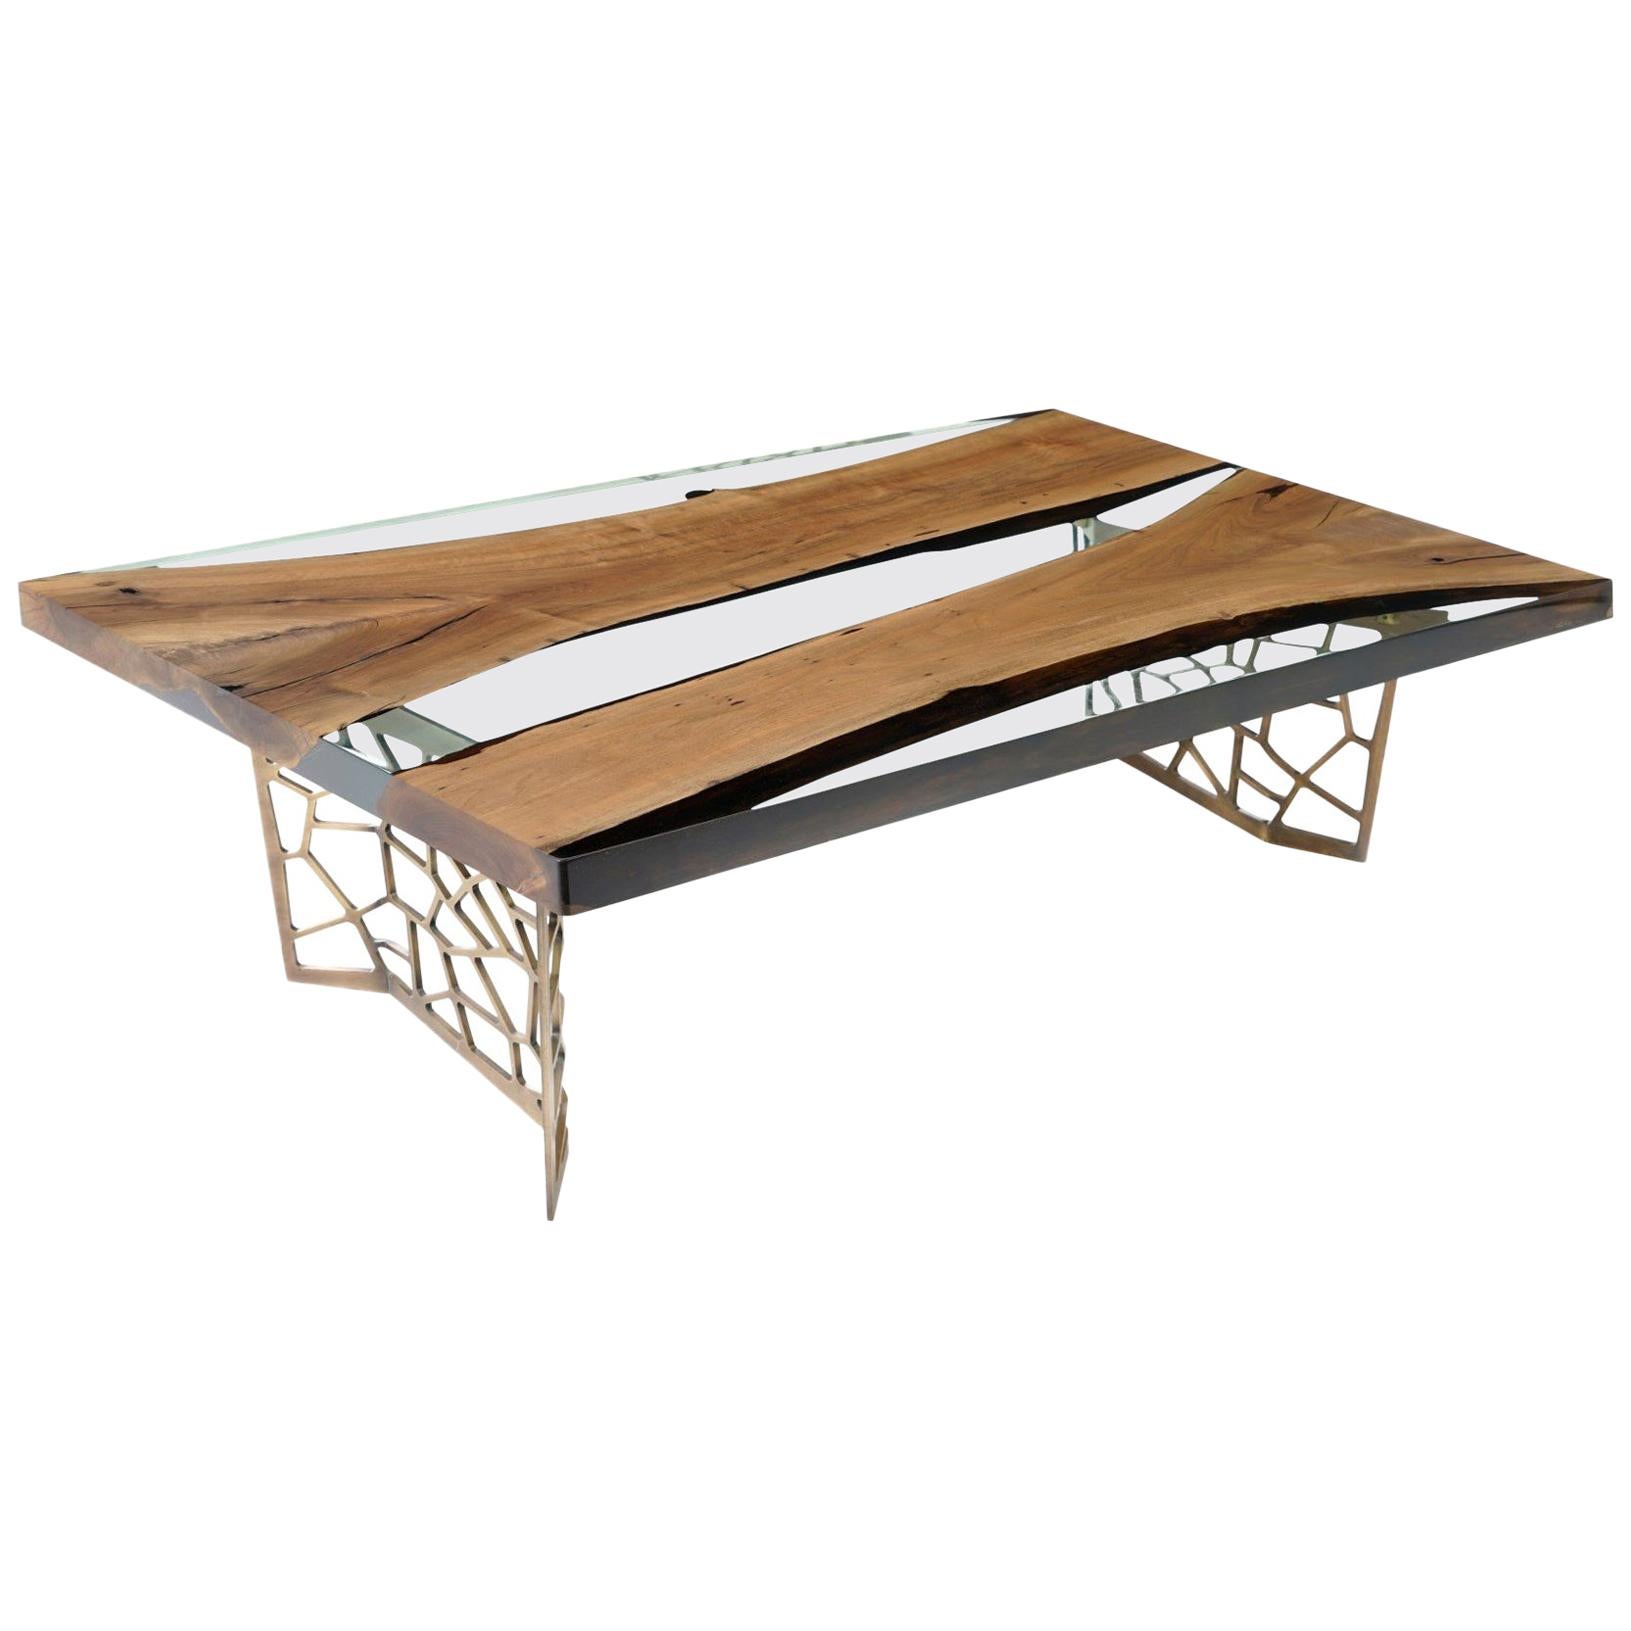 Primitive 200 Epoxy Resin Dining Table For Sale